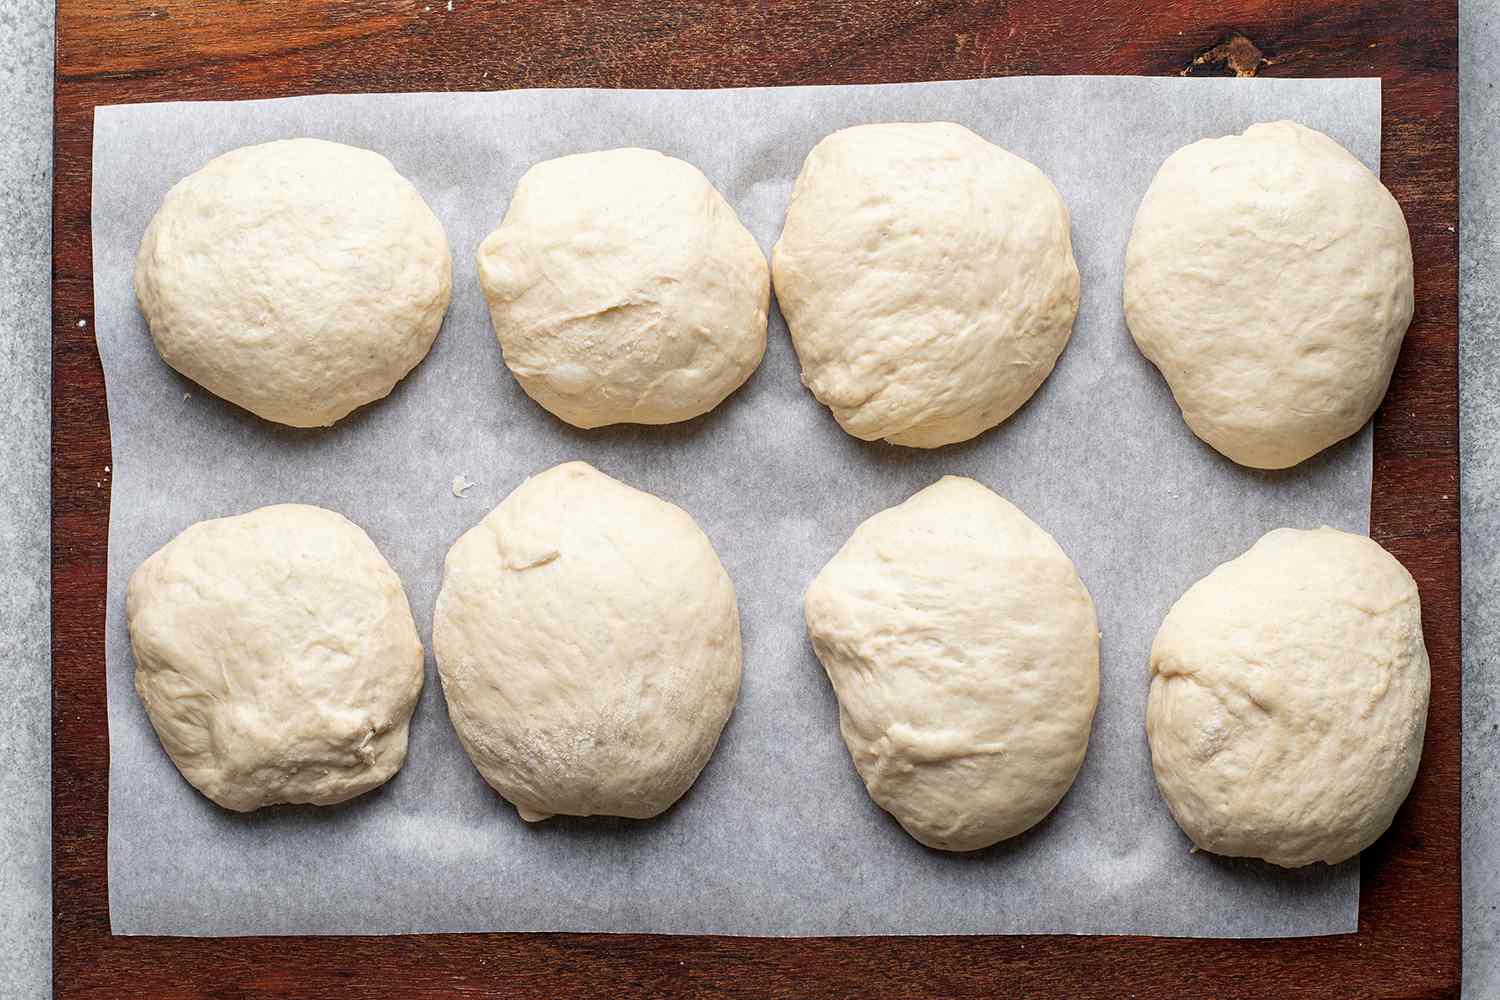 balls of bread dough on a lined baking sheet